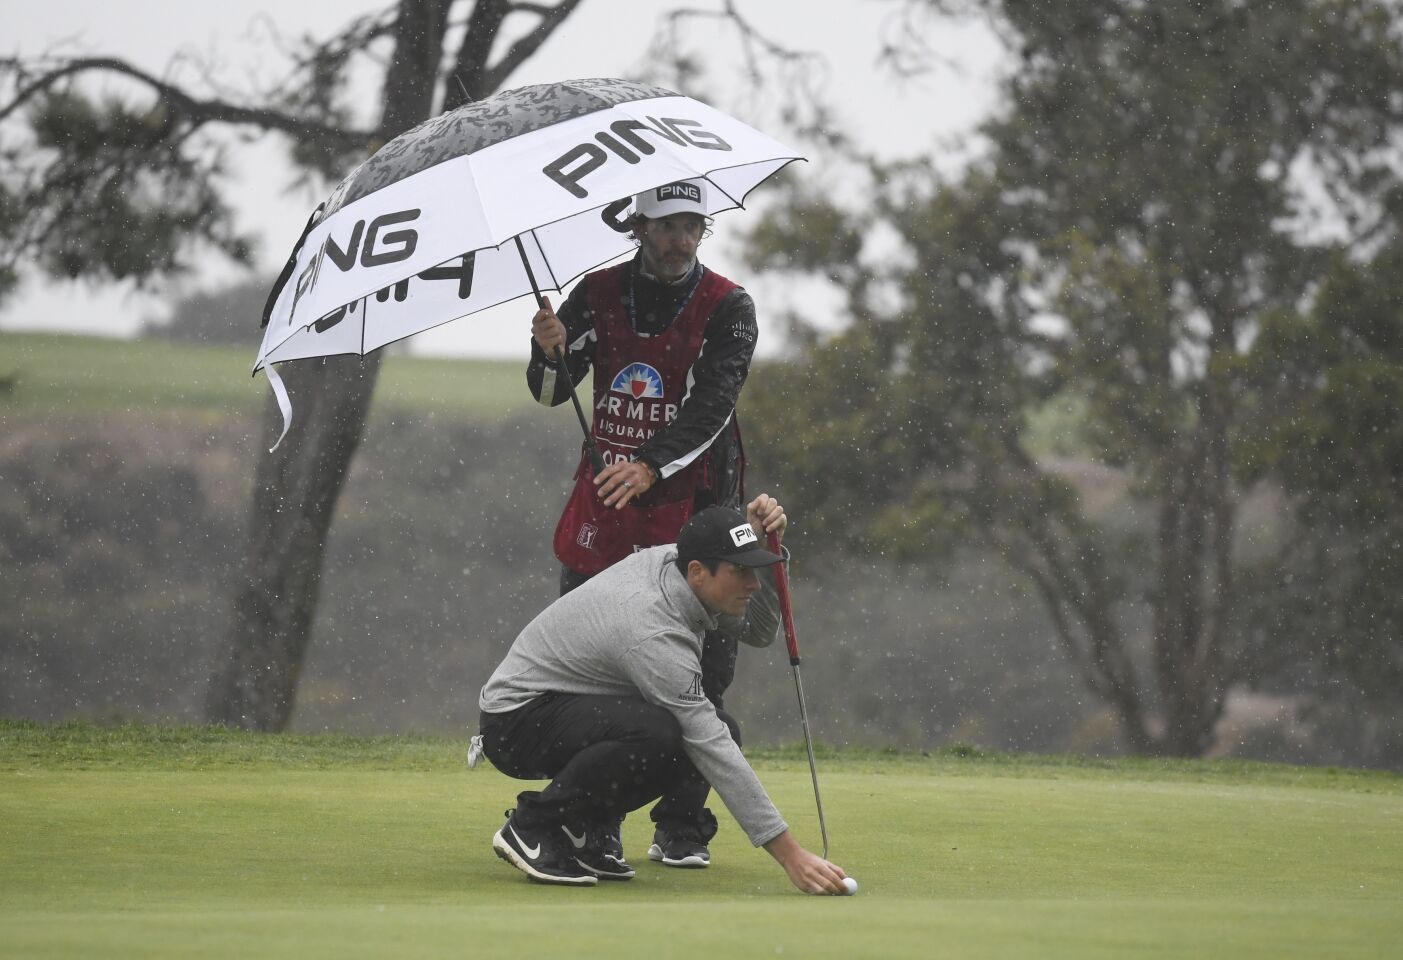 Viktor Hovland, of Norway, lines up a putt on the eighth green of the South Course during the second round of the Farmers Insurance Open golf tournament at Torrey Pines, Friday, Jan. 29, 2021, in San Diego. (Photo by Denis Poroy)